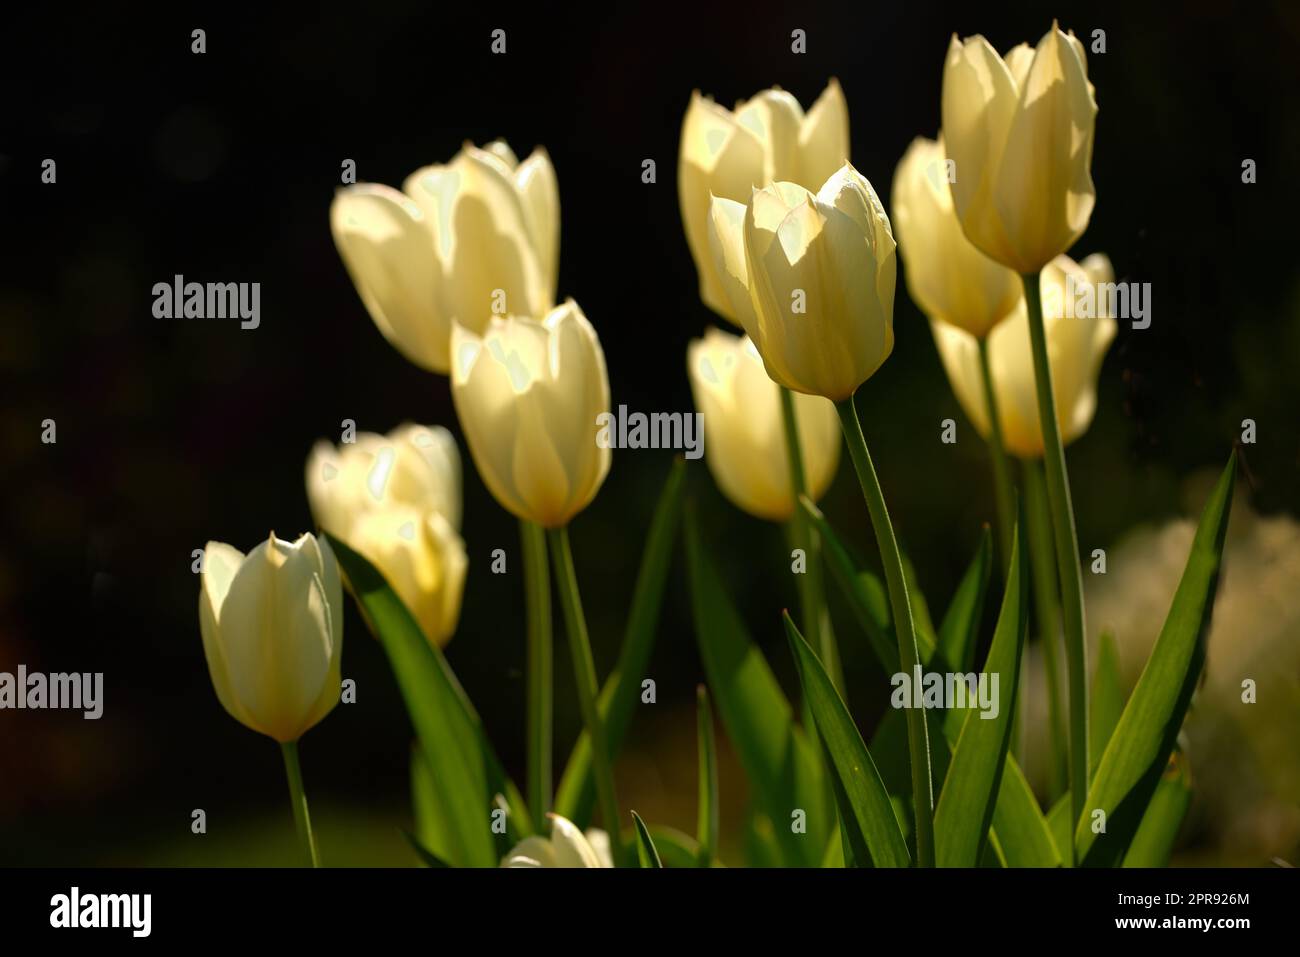 Yellow garden flowers growing against a black background. Closeup of didiers tulip from the tulipa gesneriana species with vibrant petals and green stems blooming in nature on a day in spring Stock Photo